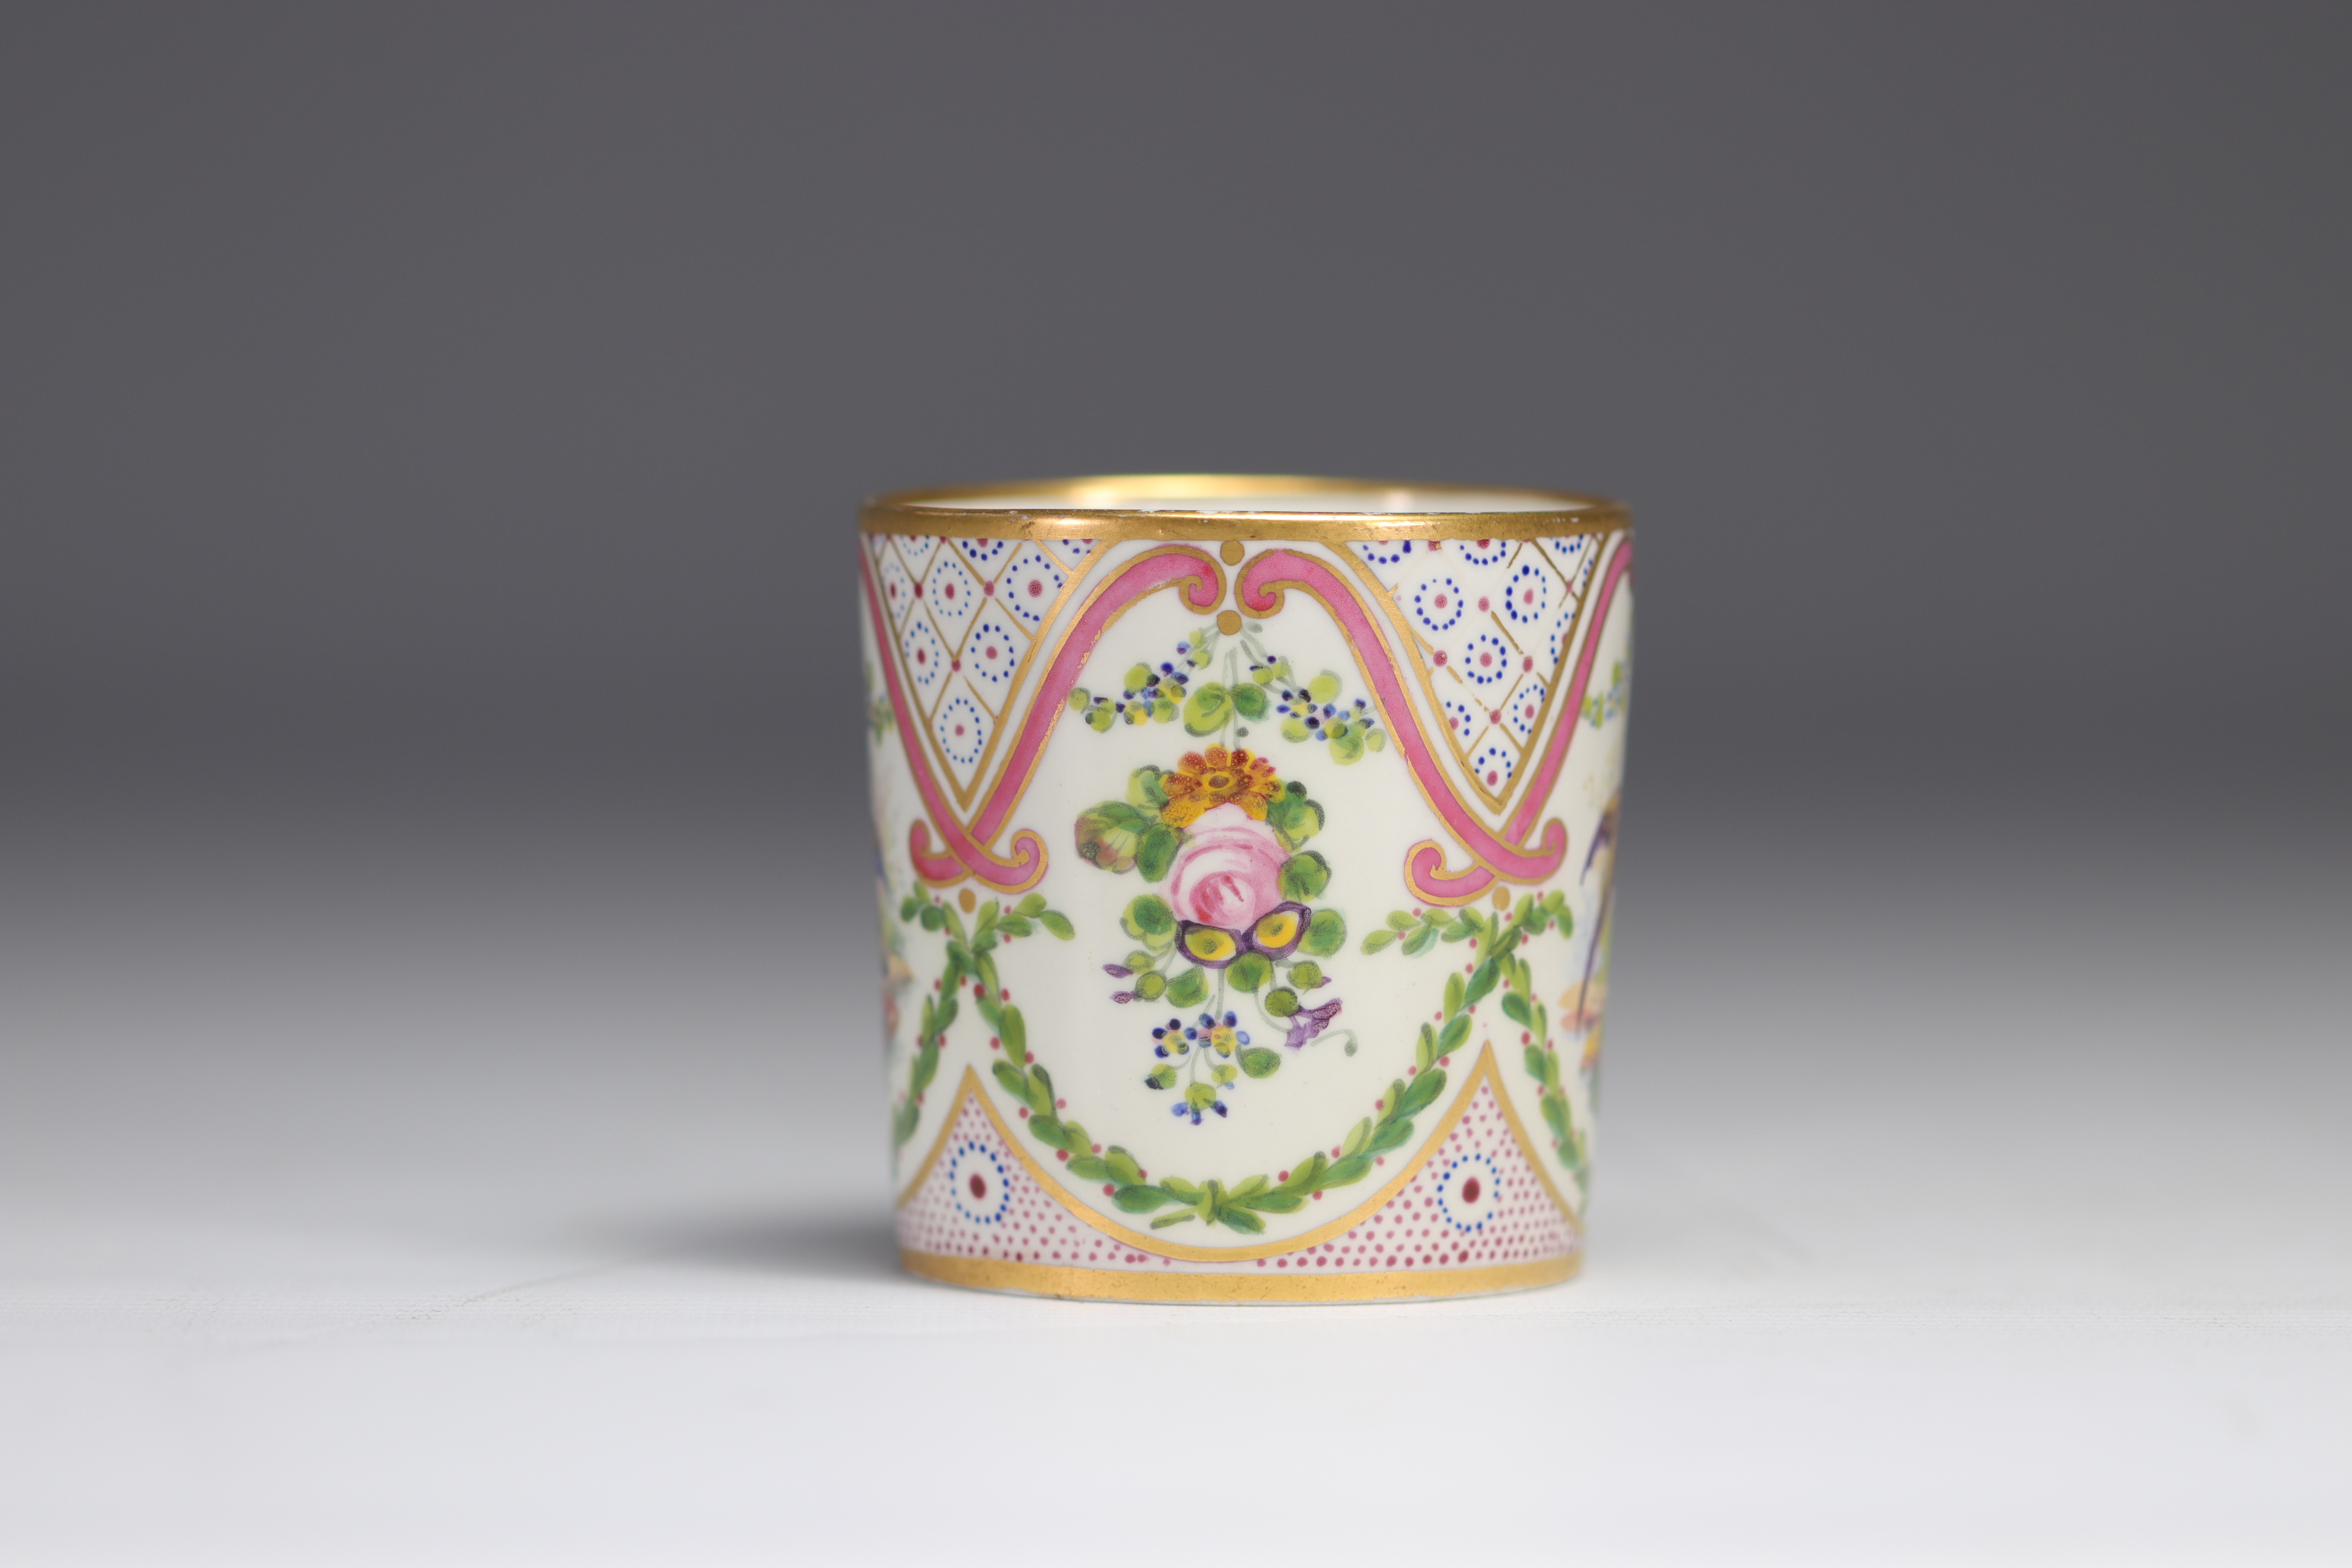 Porcelain "cup and saucer" decorated with birds and flowers from Tournai (Belgium) from 18th century - Image 4 of 7